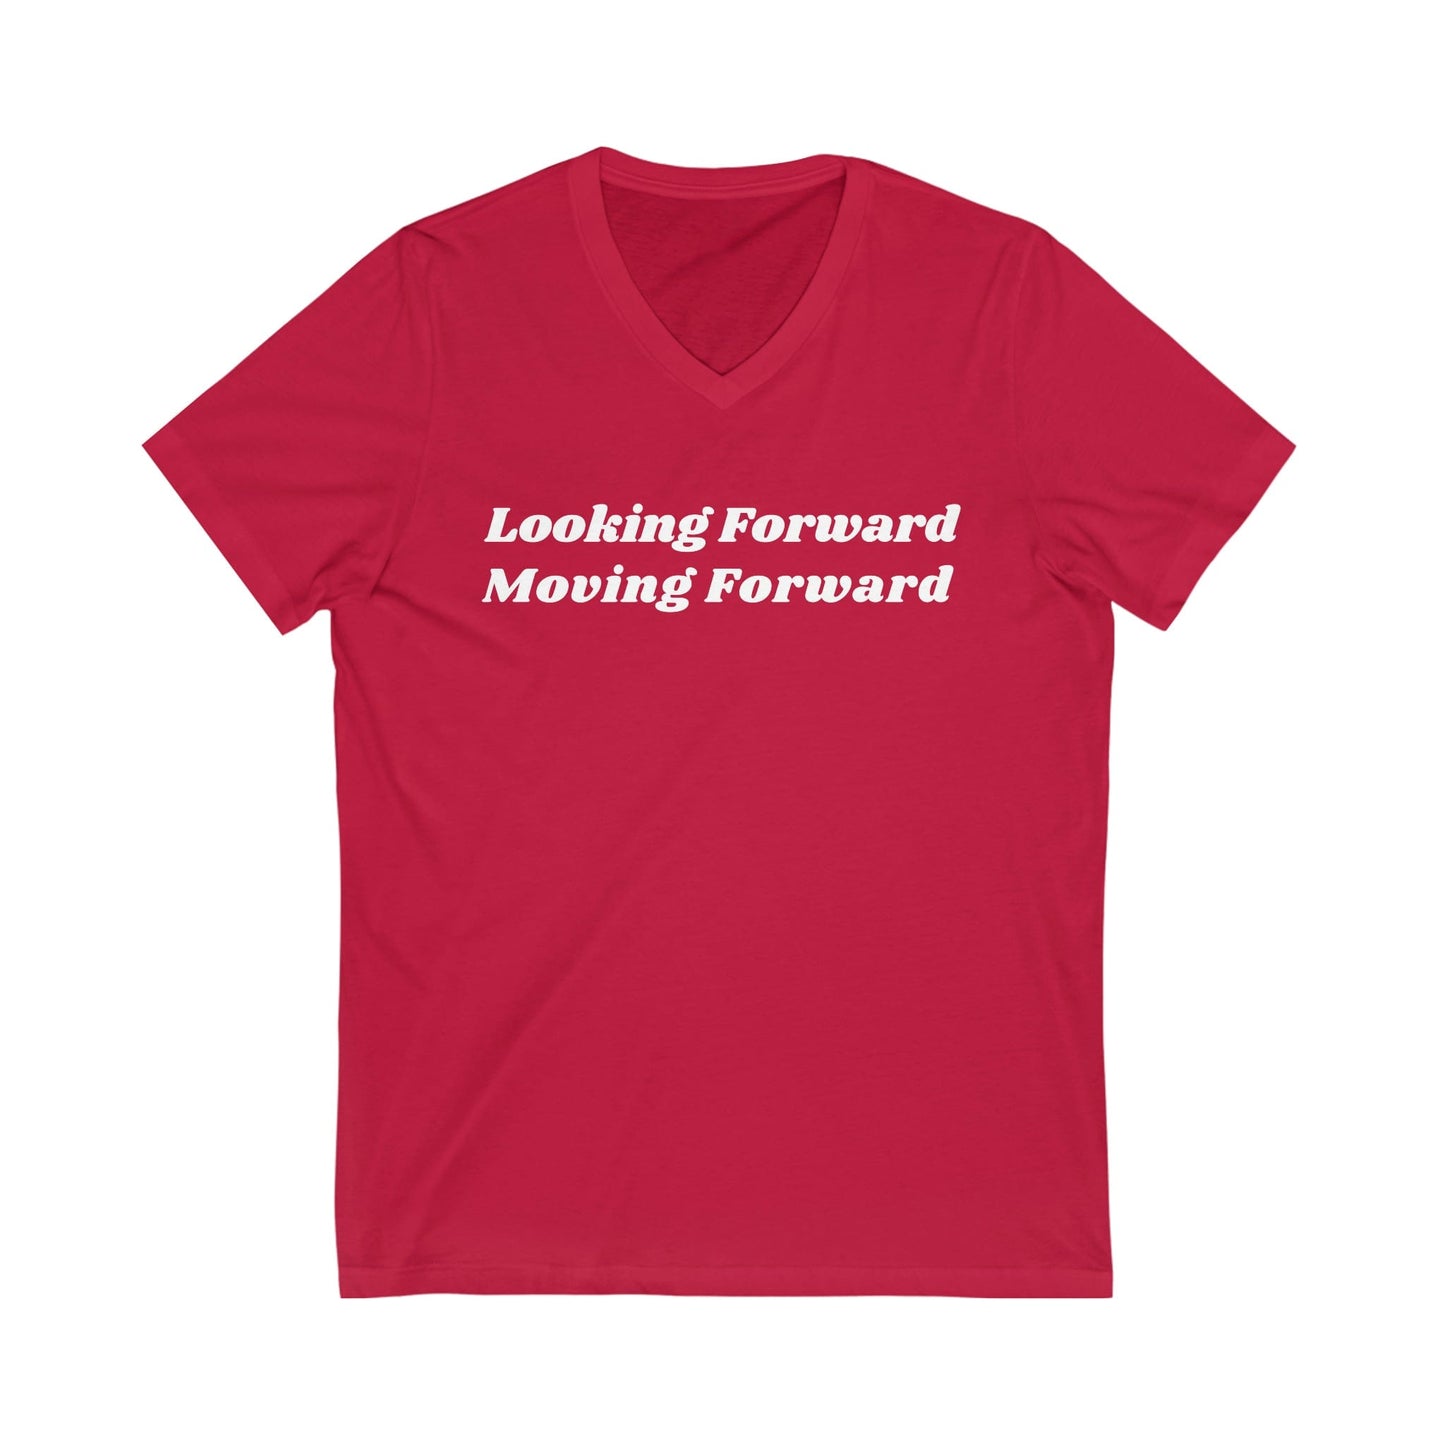  Moving forward with my life Tee, Leaving Domestic Violence T-Shirt, Women’s Empowerment V-Neck